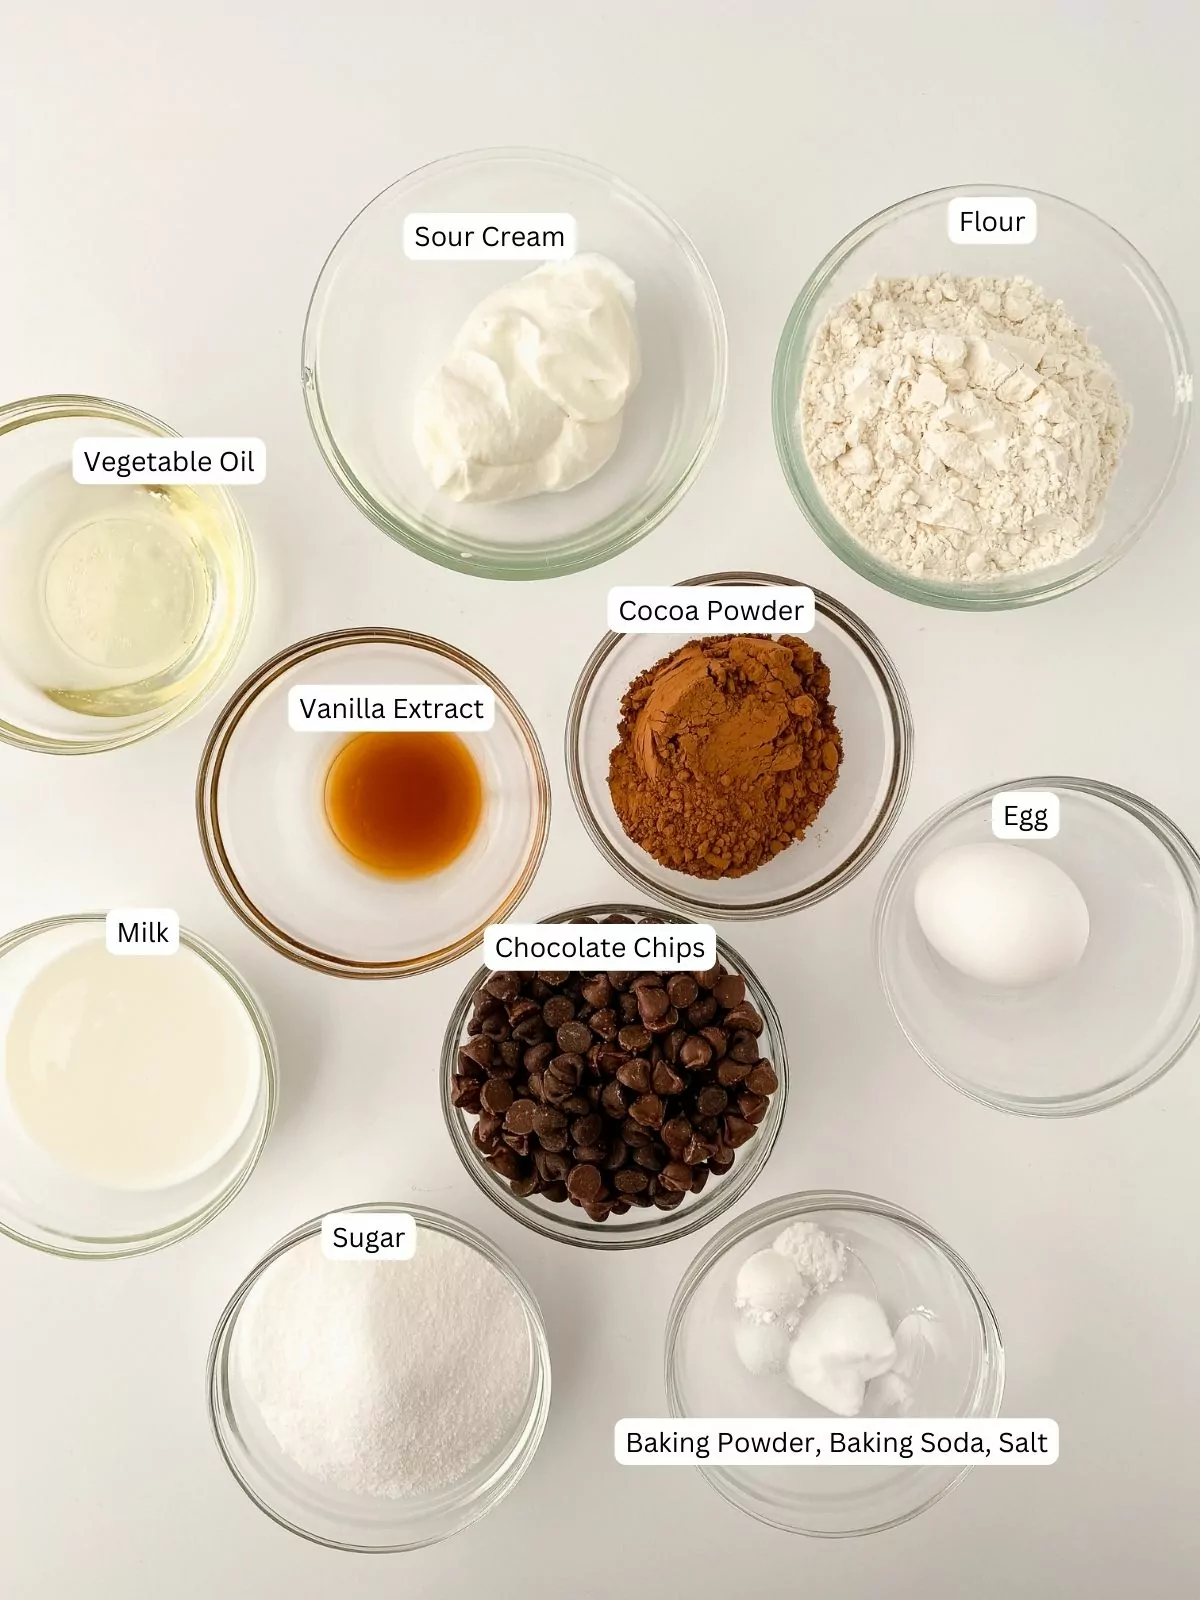 Ingredients for chocolate muffins.